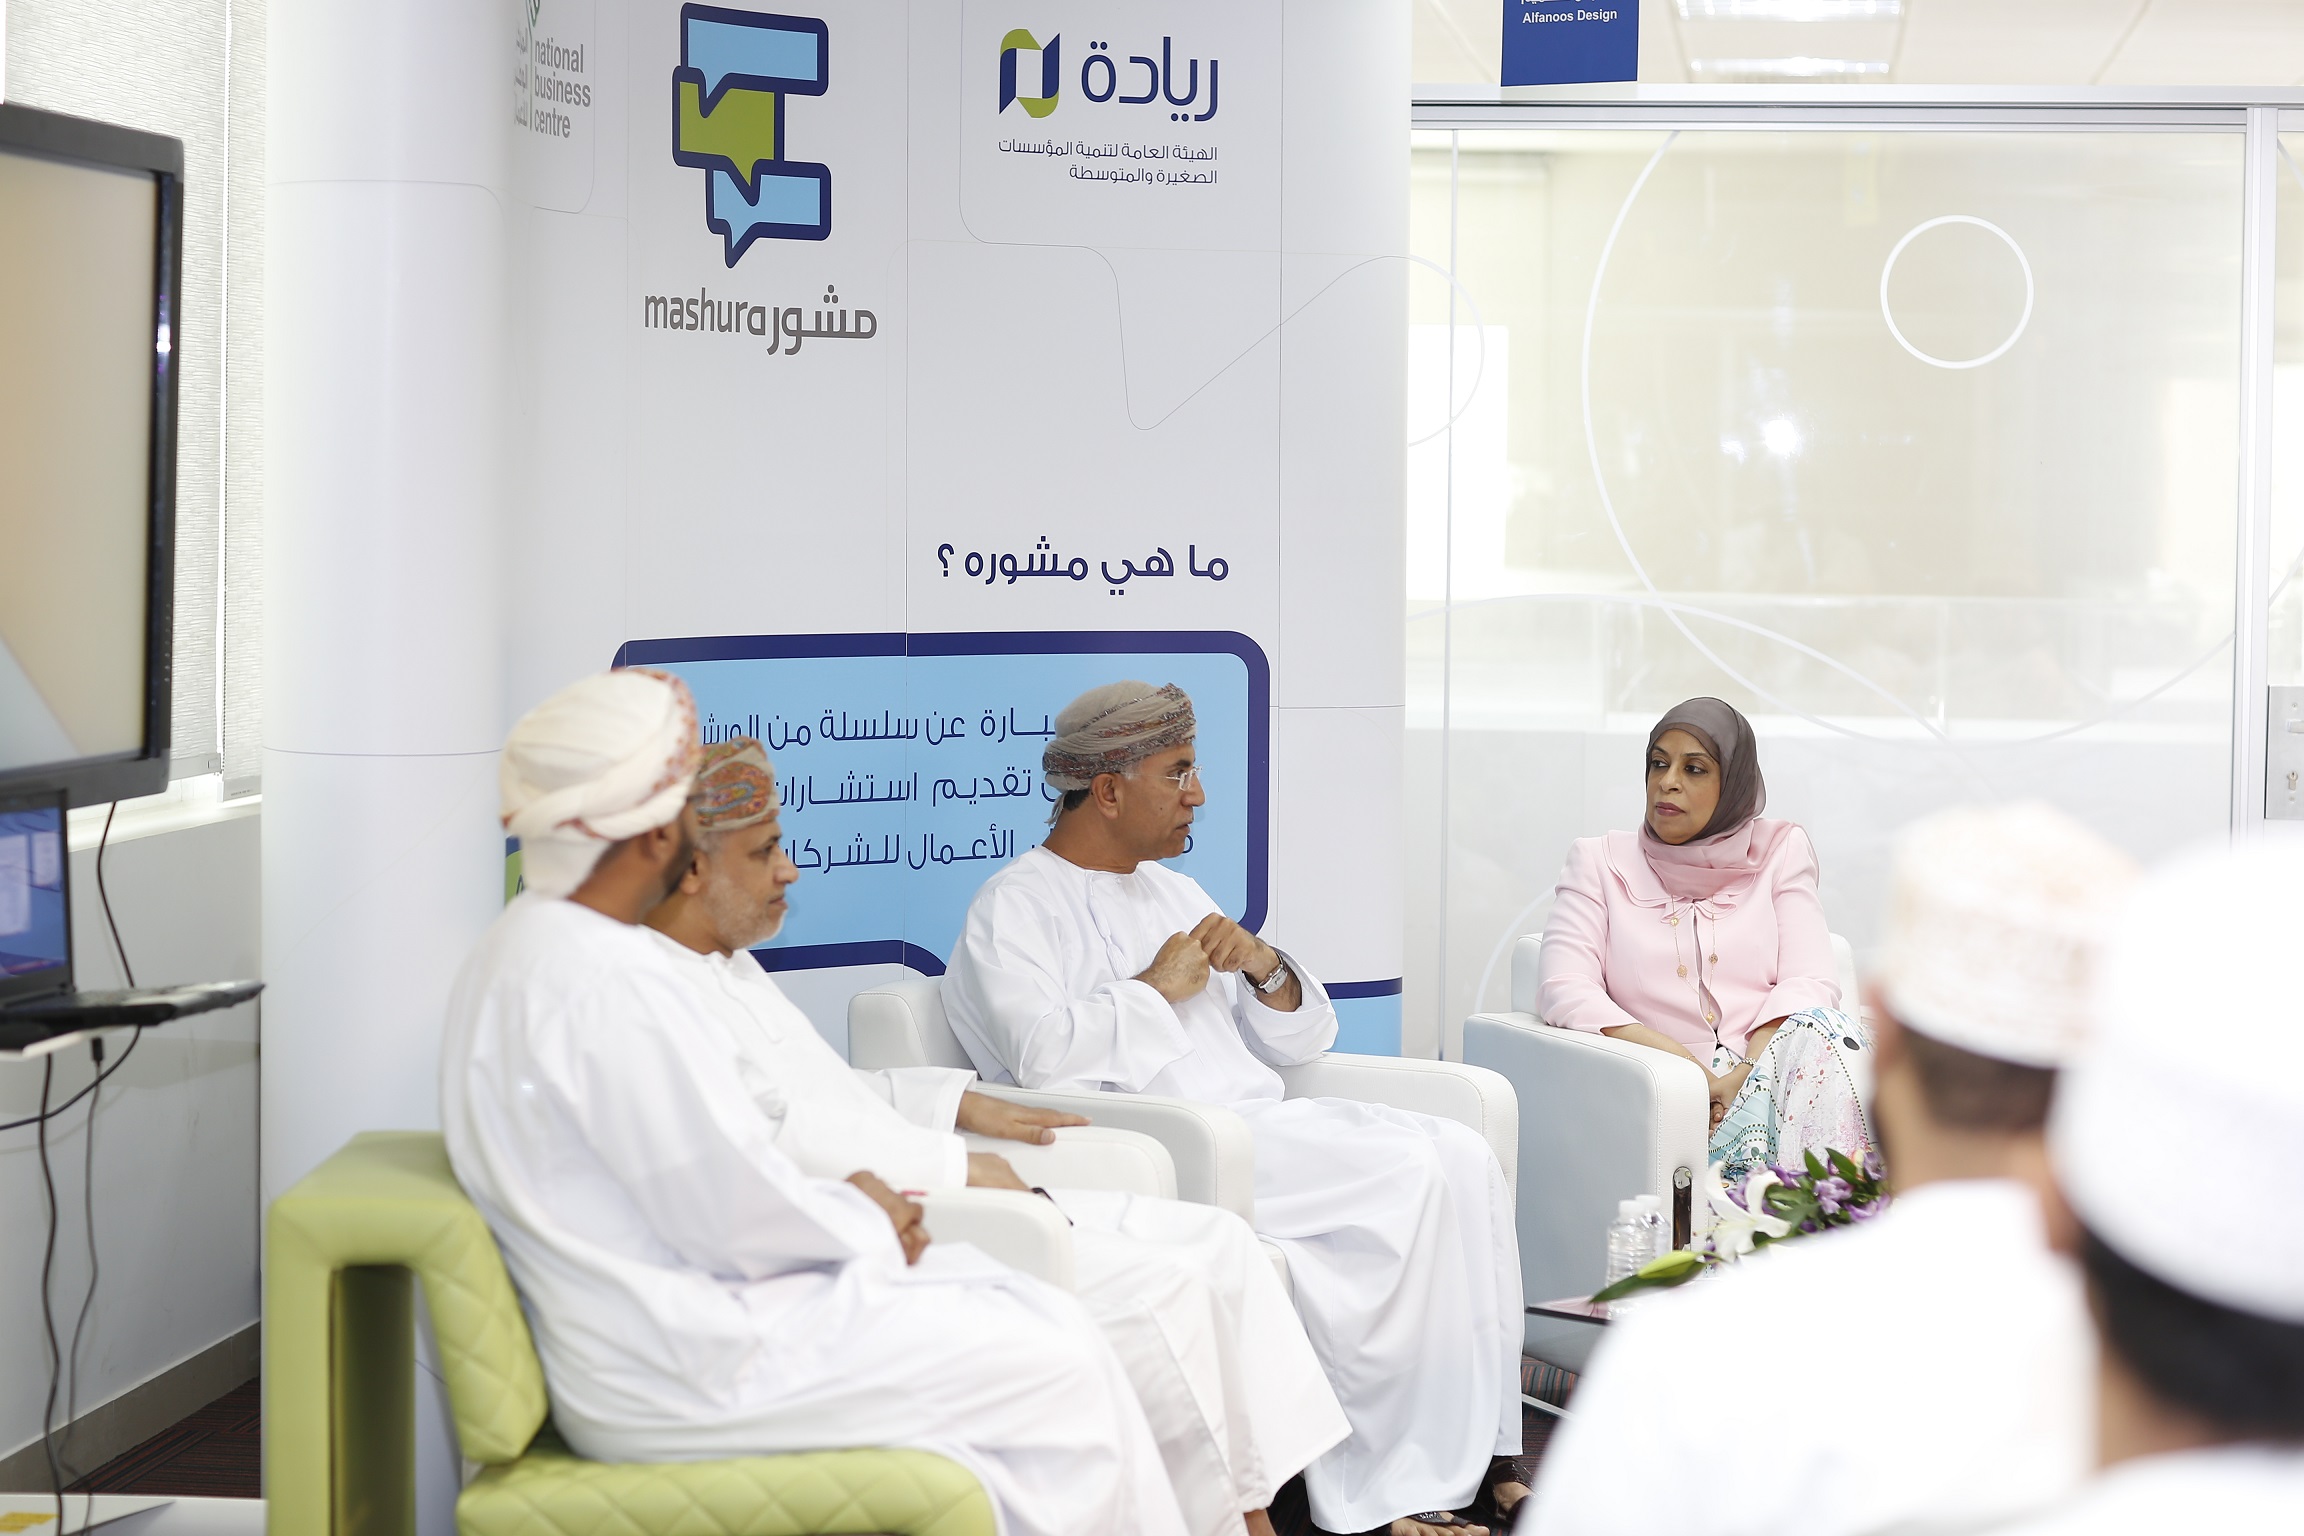 Workshops throw light on rights of employers, staff in Oman